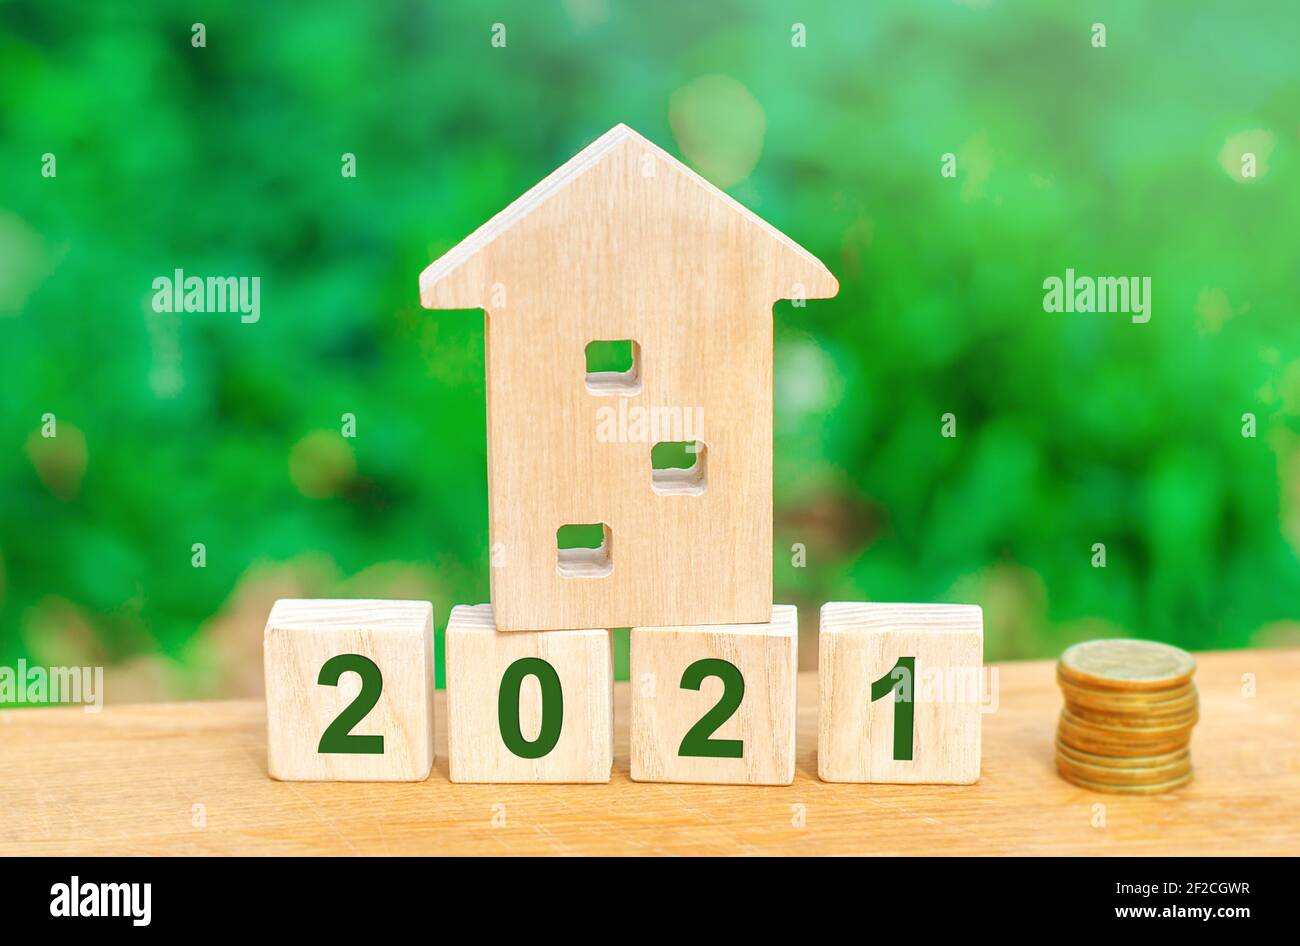 2021 wooden blocks and miniature house. Real estate concept. Family budget planning. Investments, plans, savings. Mortgage and mortgage rates. Forecas Stock Photo